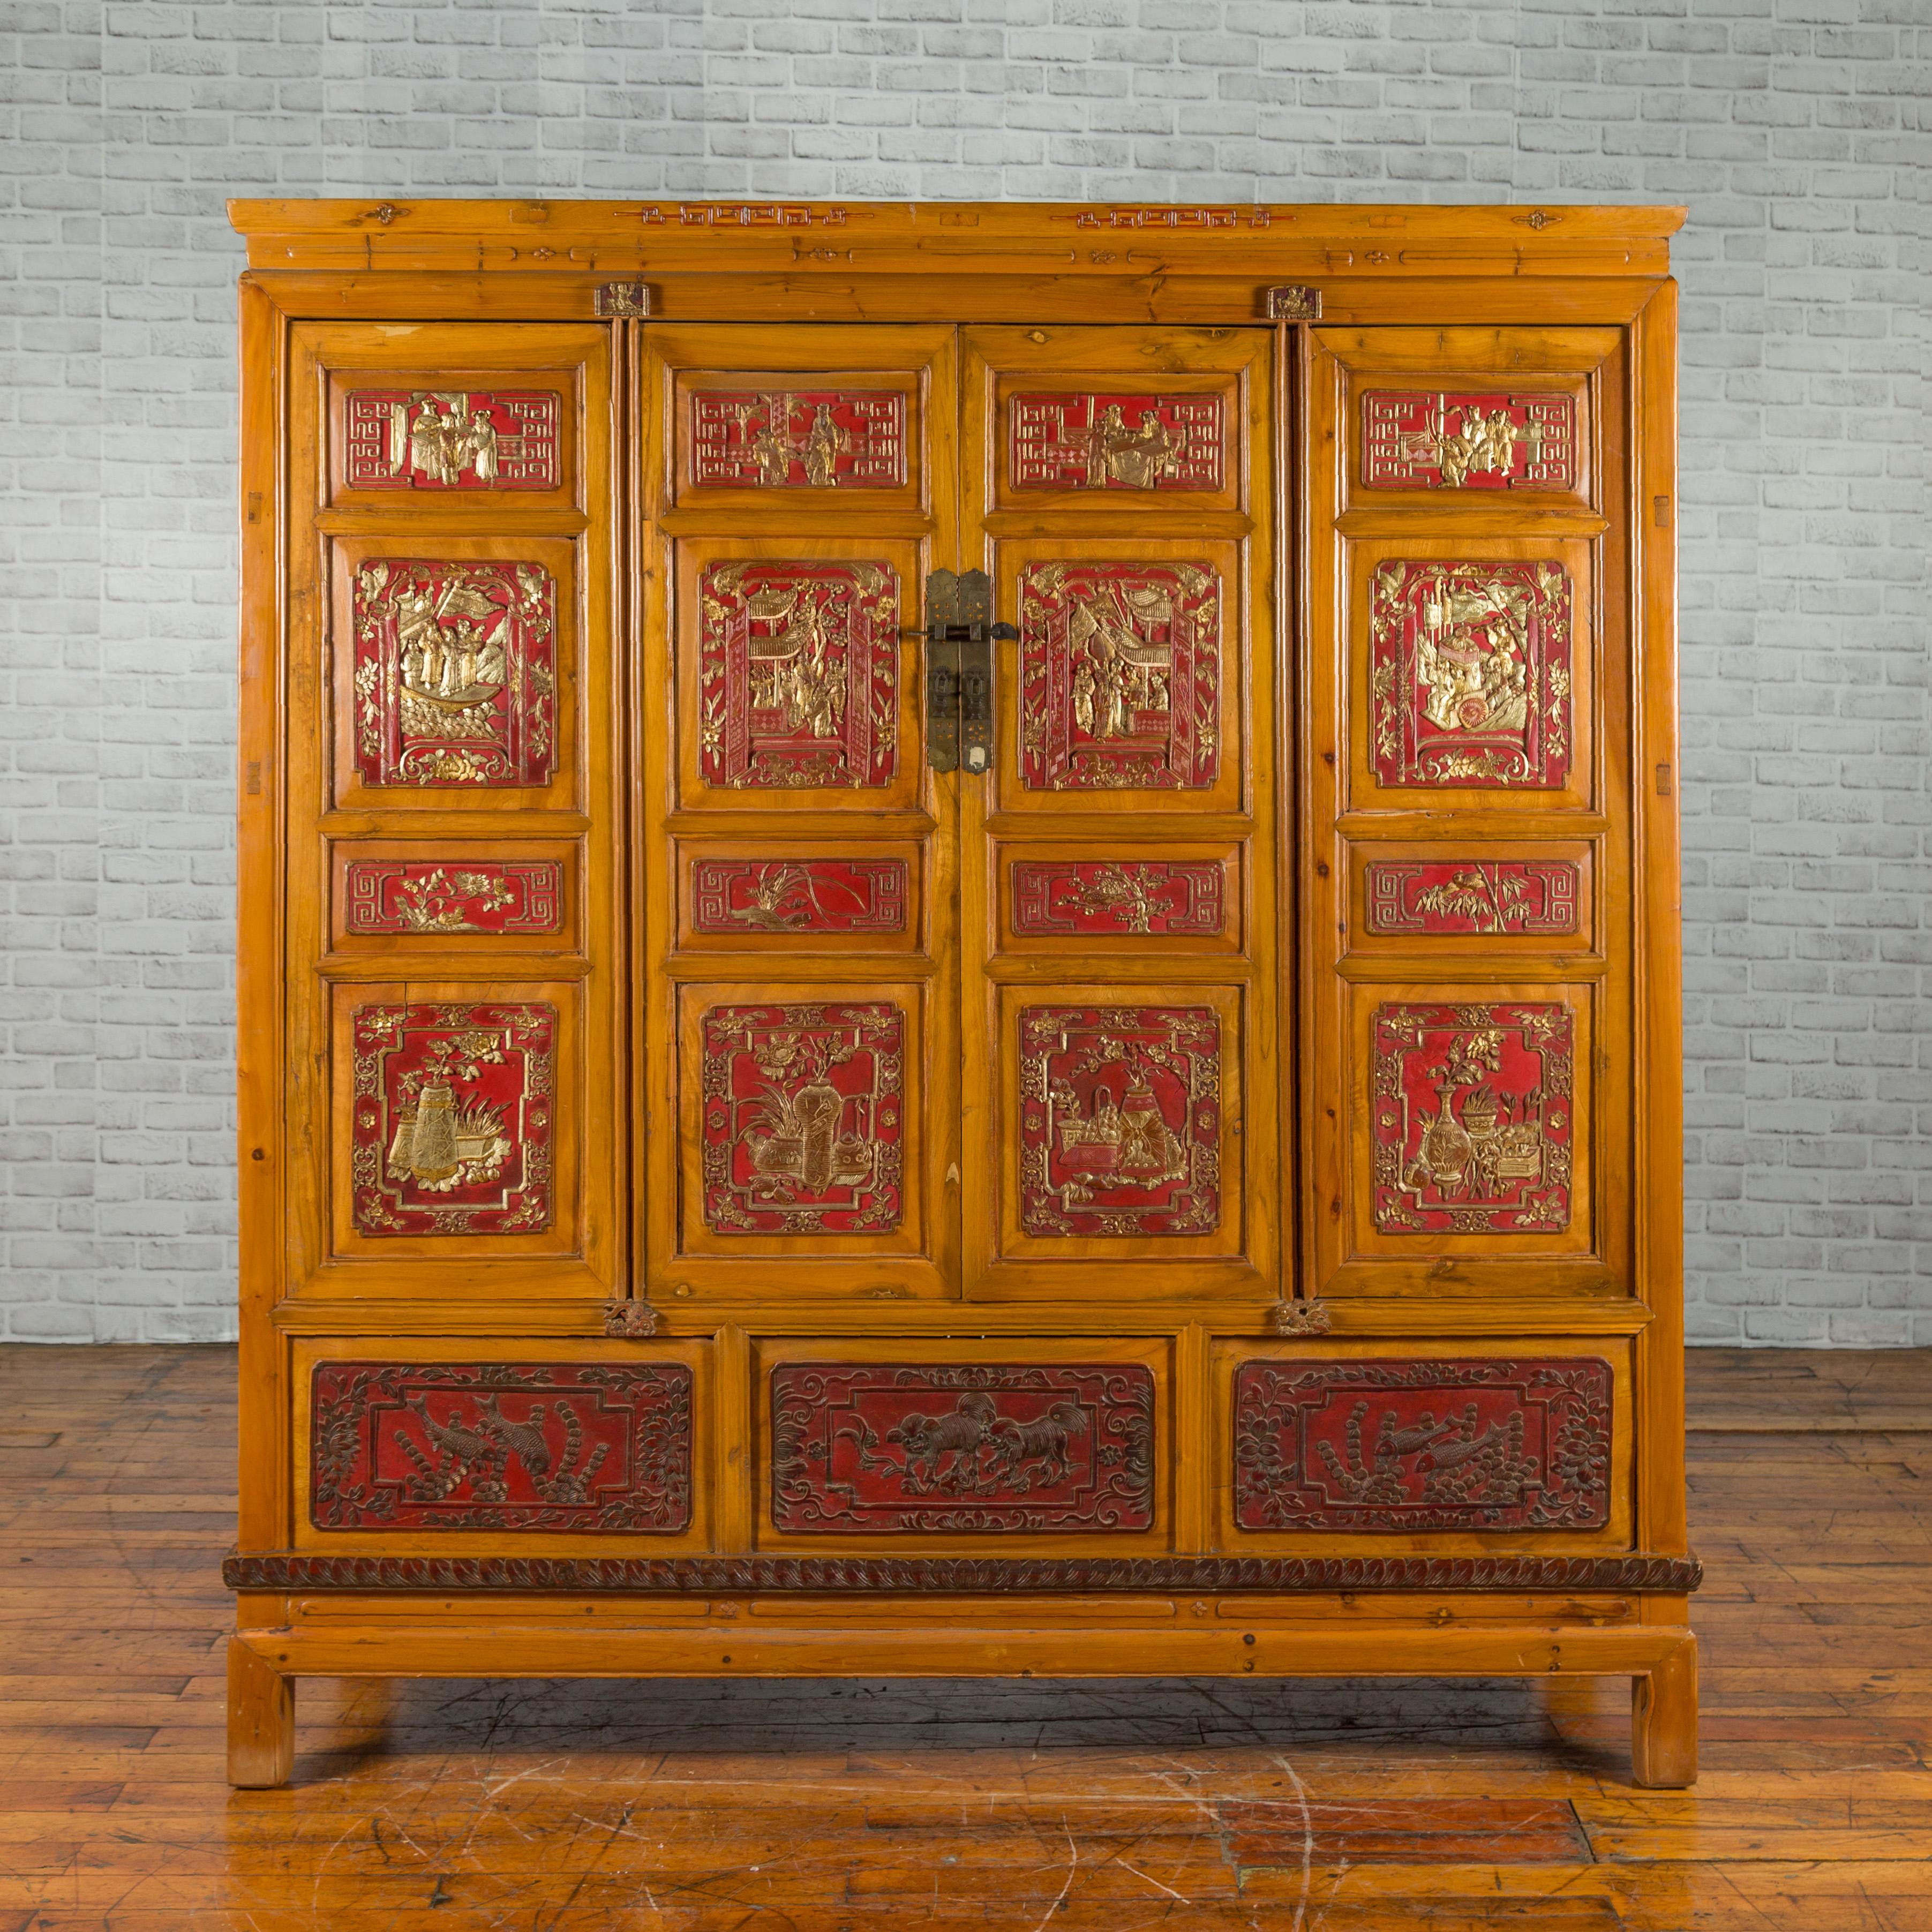 A large Qing dynasty Chinese hand carved, painted and gilded armoire from the 19th century, with 19 panels, four doors and three removable panels revealing a secret compartment. Created in China during the Qing dynasty, this large armoire draws our